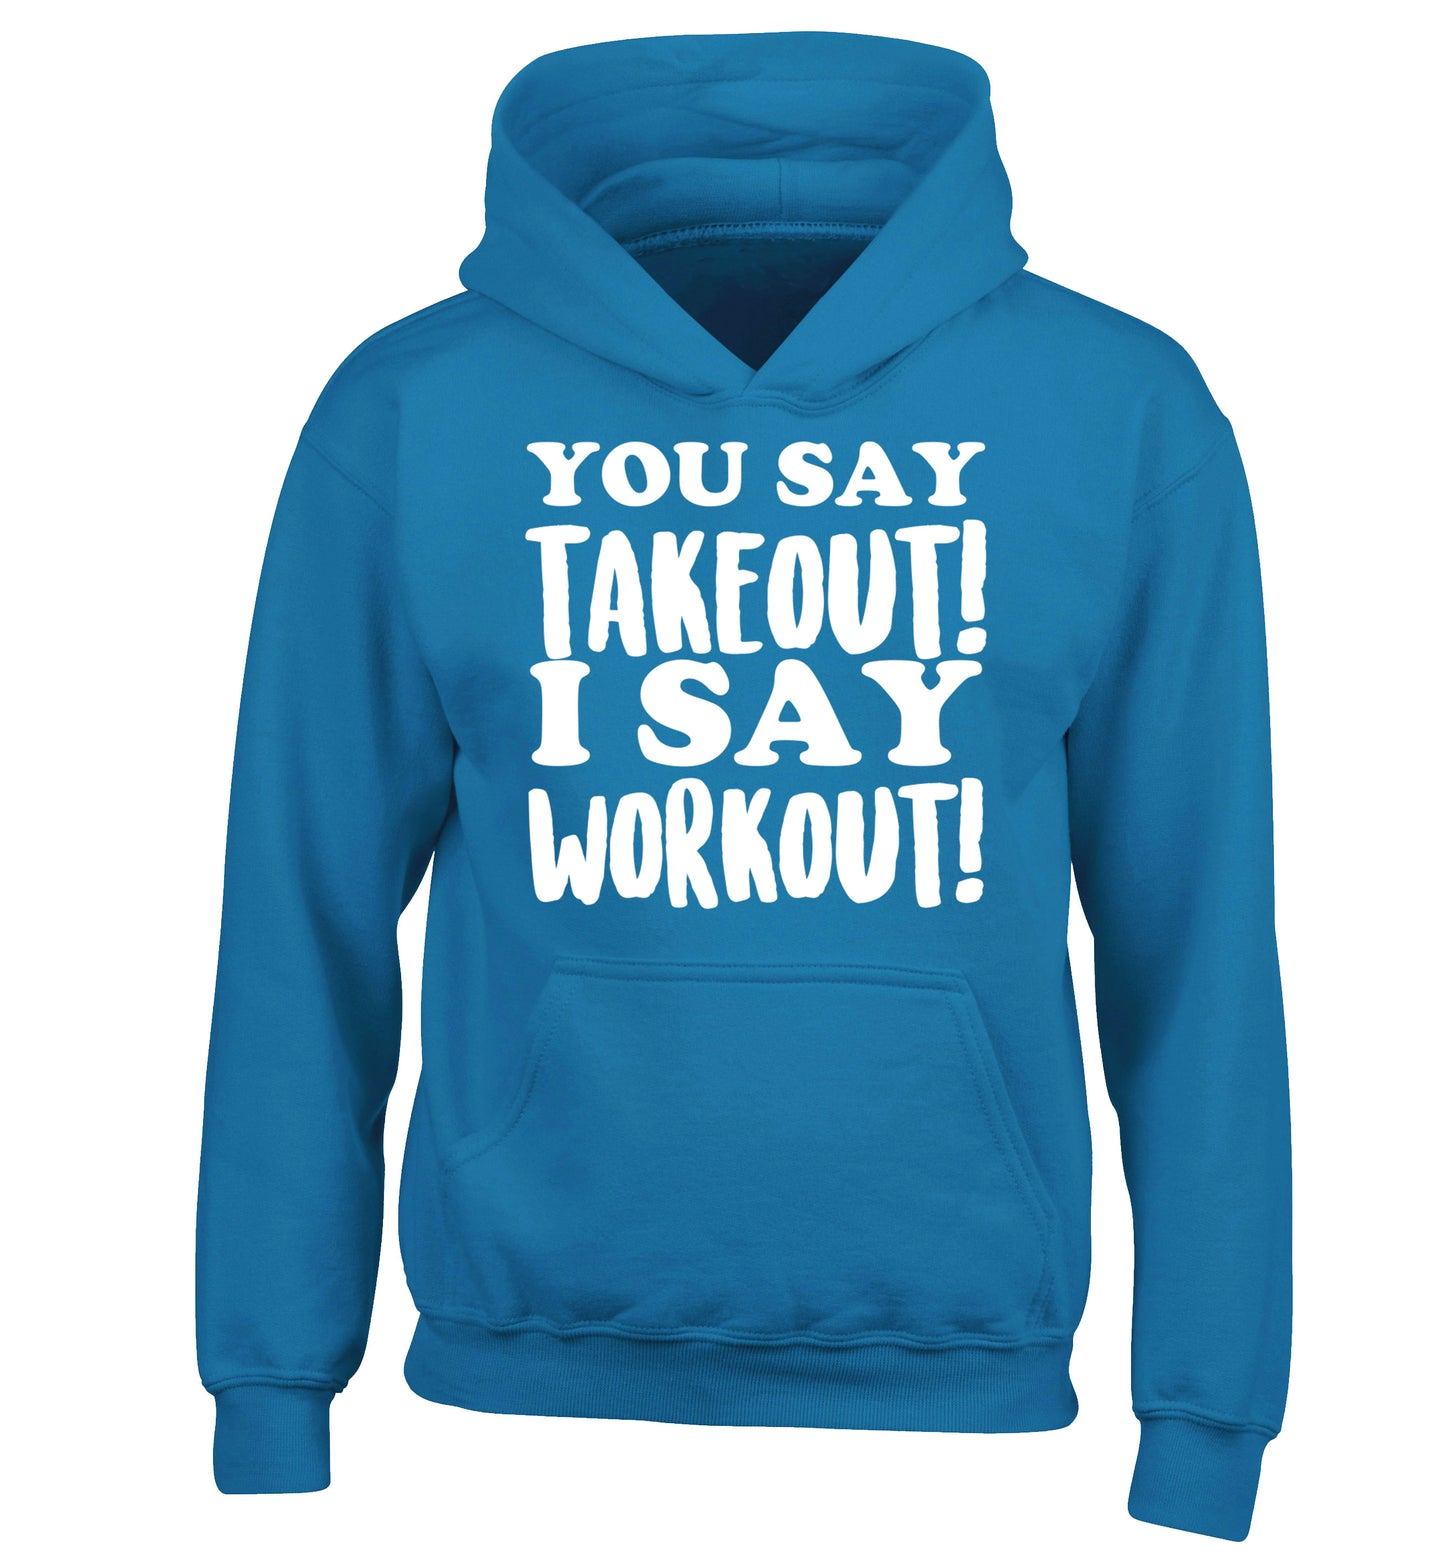 You say takeout I say workout! children's blue hoodie 12-14 Years